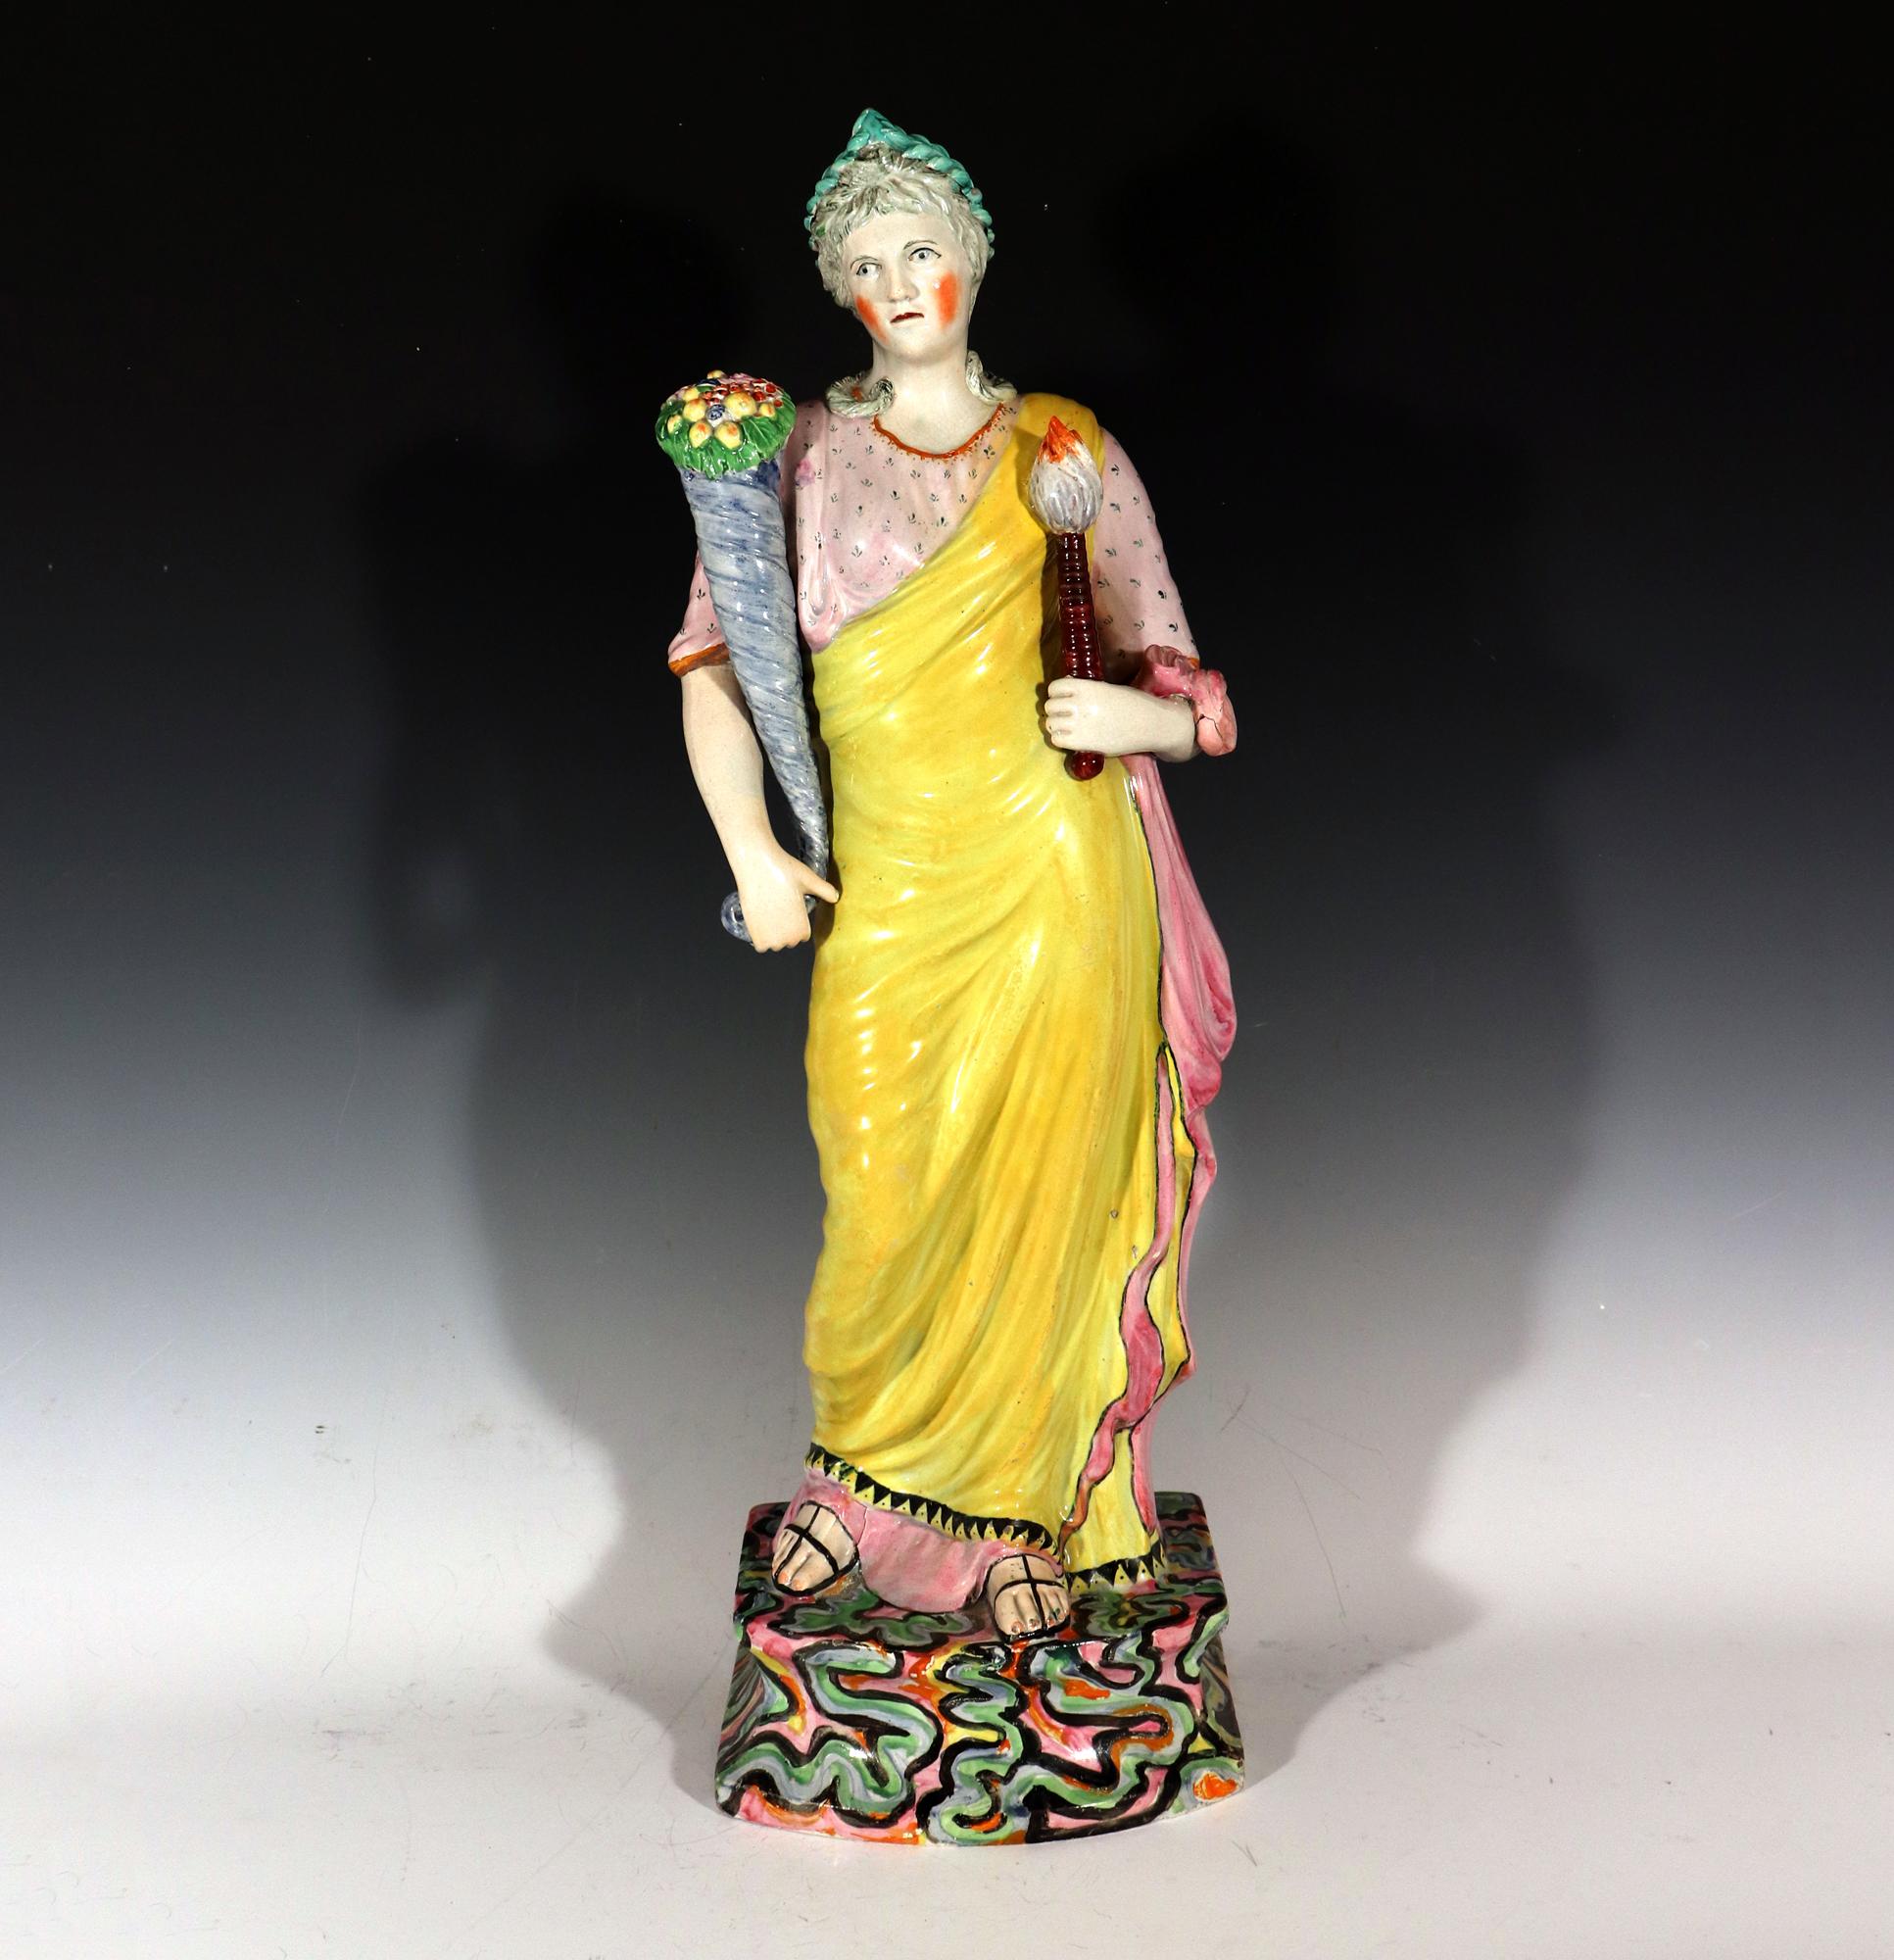 Massive Staffordshire Pearlware Pottery Figure of Ceres or Plenty,
circa 1815

This large scale figure of Ceres or Plenty is a stunning example of Staffordshire pottery. The figure is finely modeled and enamelled in colors, and she stands on a